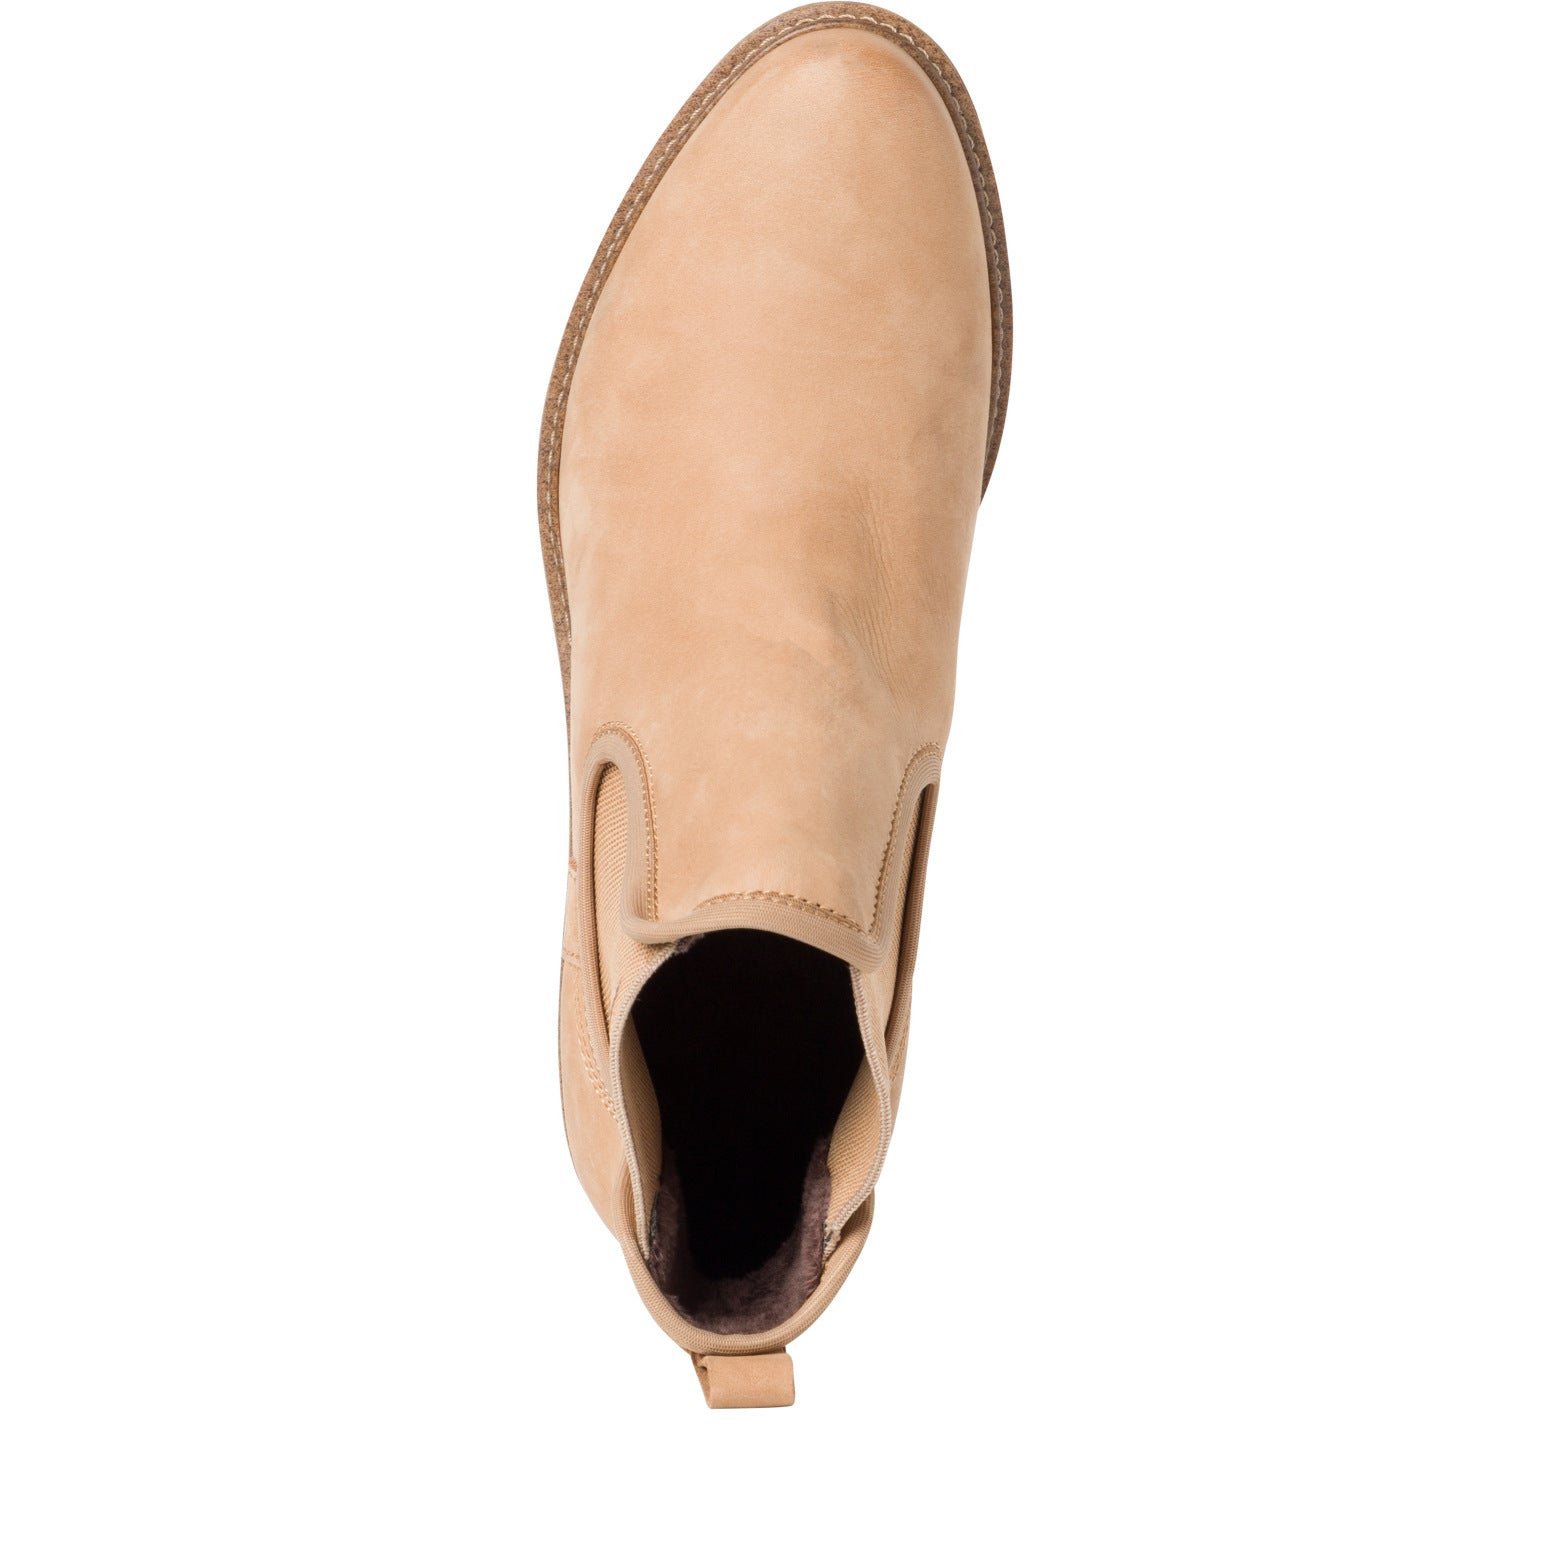 Tamaris 25440-29 310 Ladies Camel Leather Pull On Ankle Boots